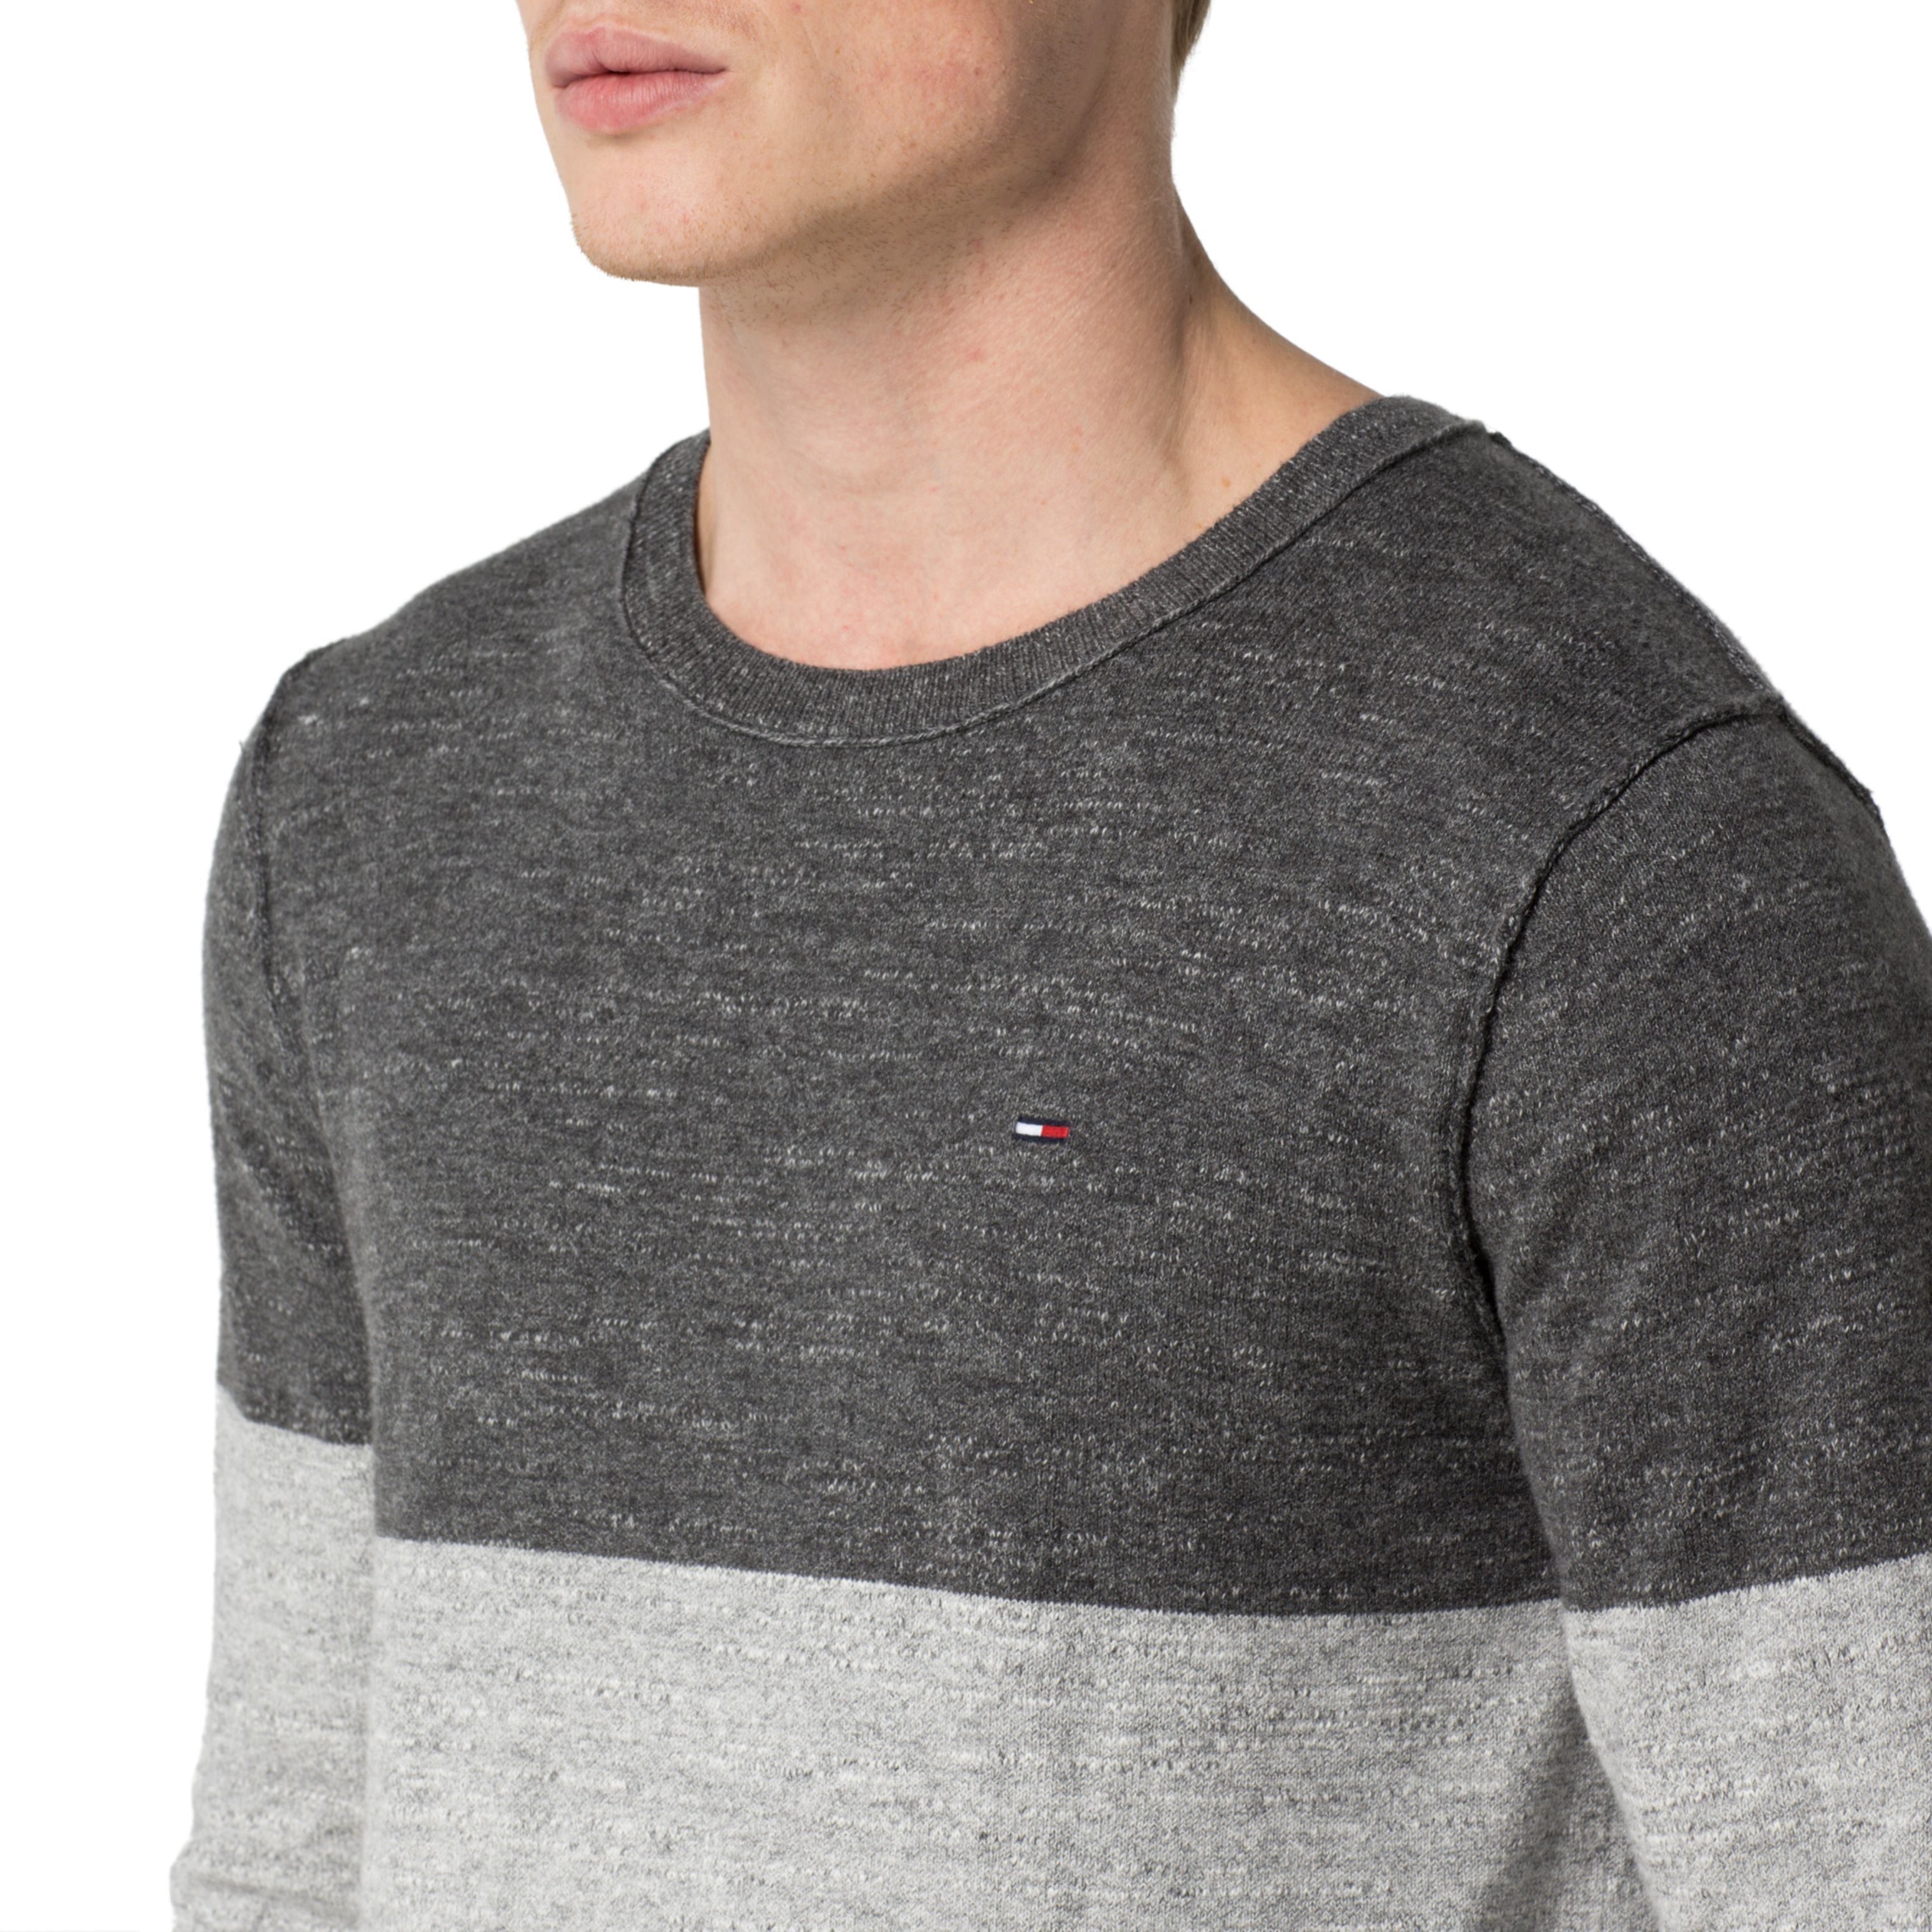 Tommy Hilfiger Cotton Georgia Sweater in Grey (Gray) for Men - Lyst